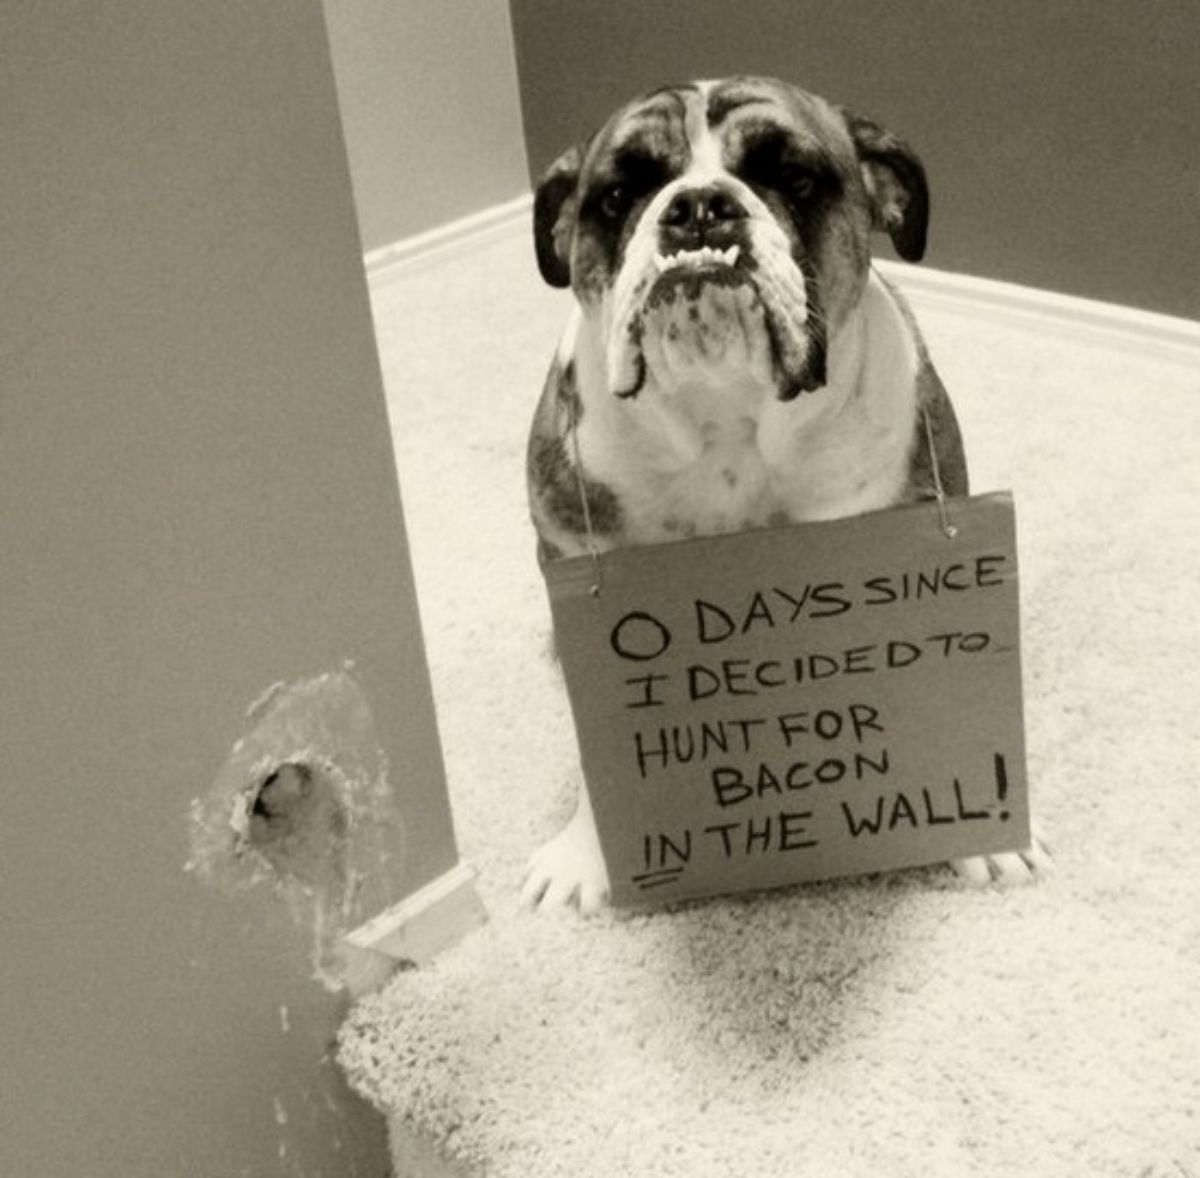 bulldog sitting on the floor next to a wall with a hole in it with a note saying "0 days since I decided to hunt for bacon in the wall"